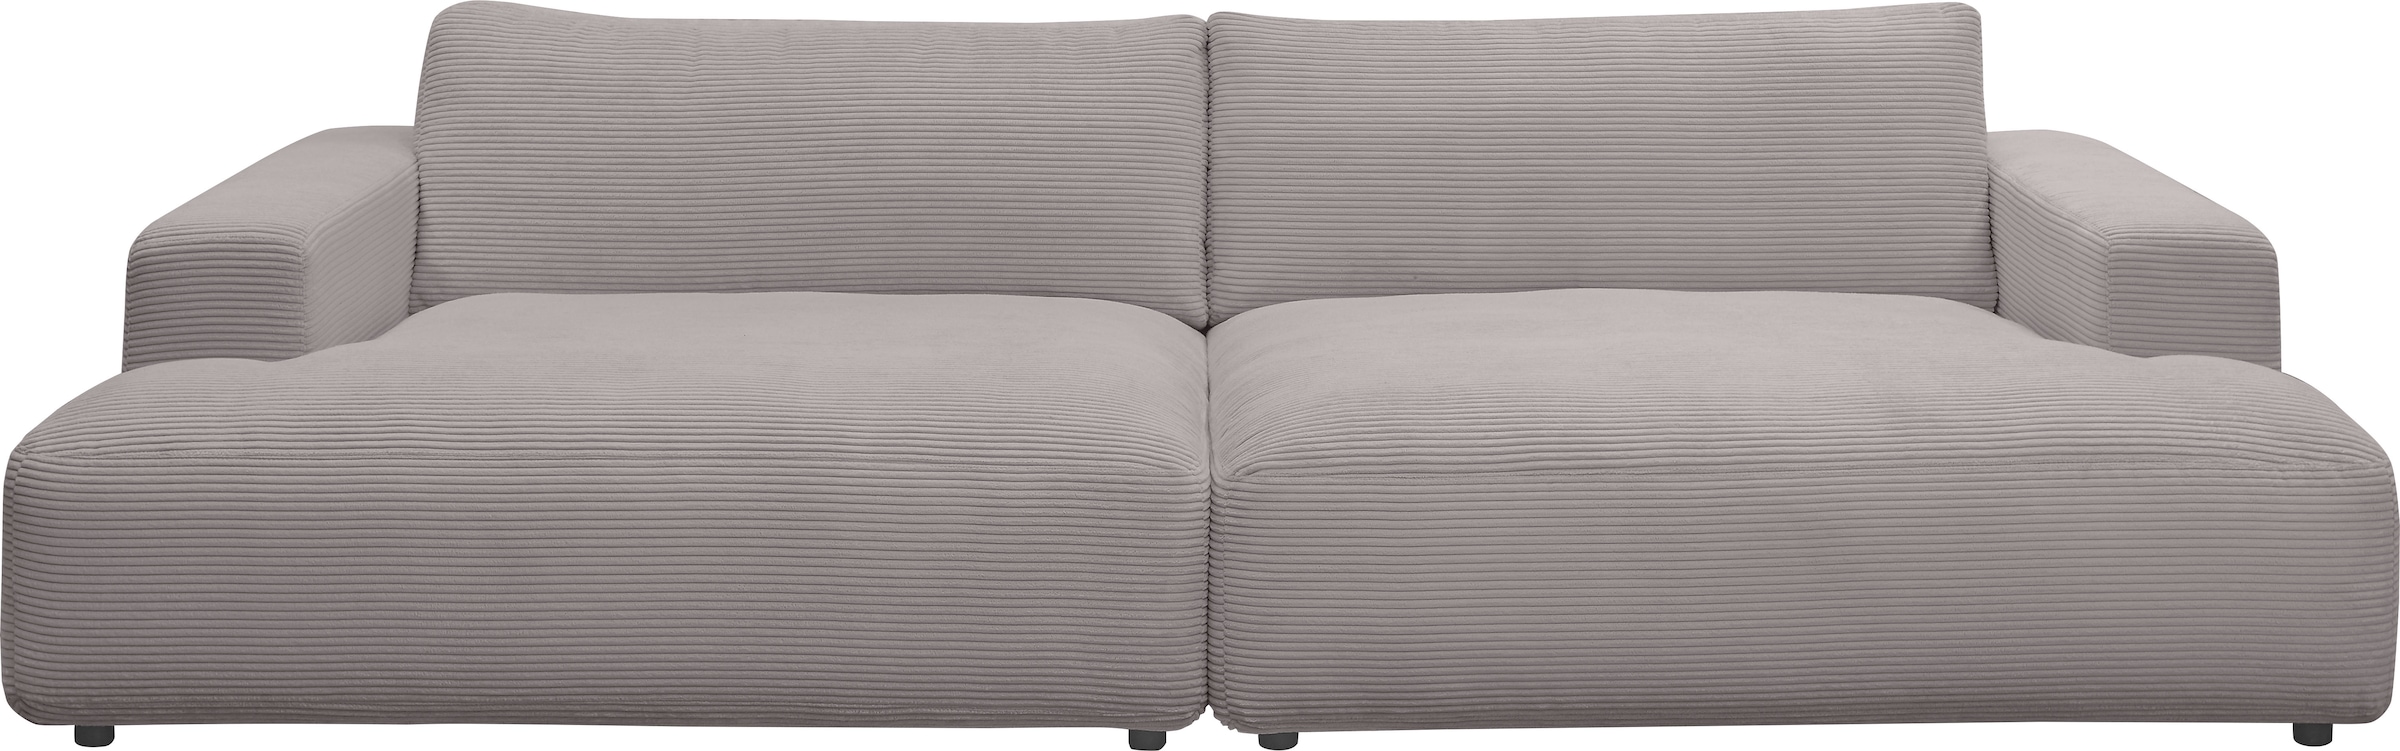 branded Shop Breite cm »Lucia«, Cord-Bezug, by Musterring Online M 292 OTTO Loungesofa GALLERY